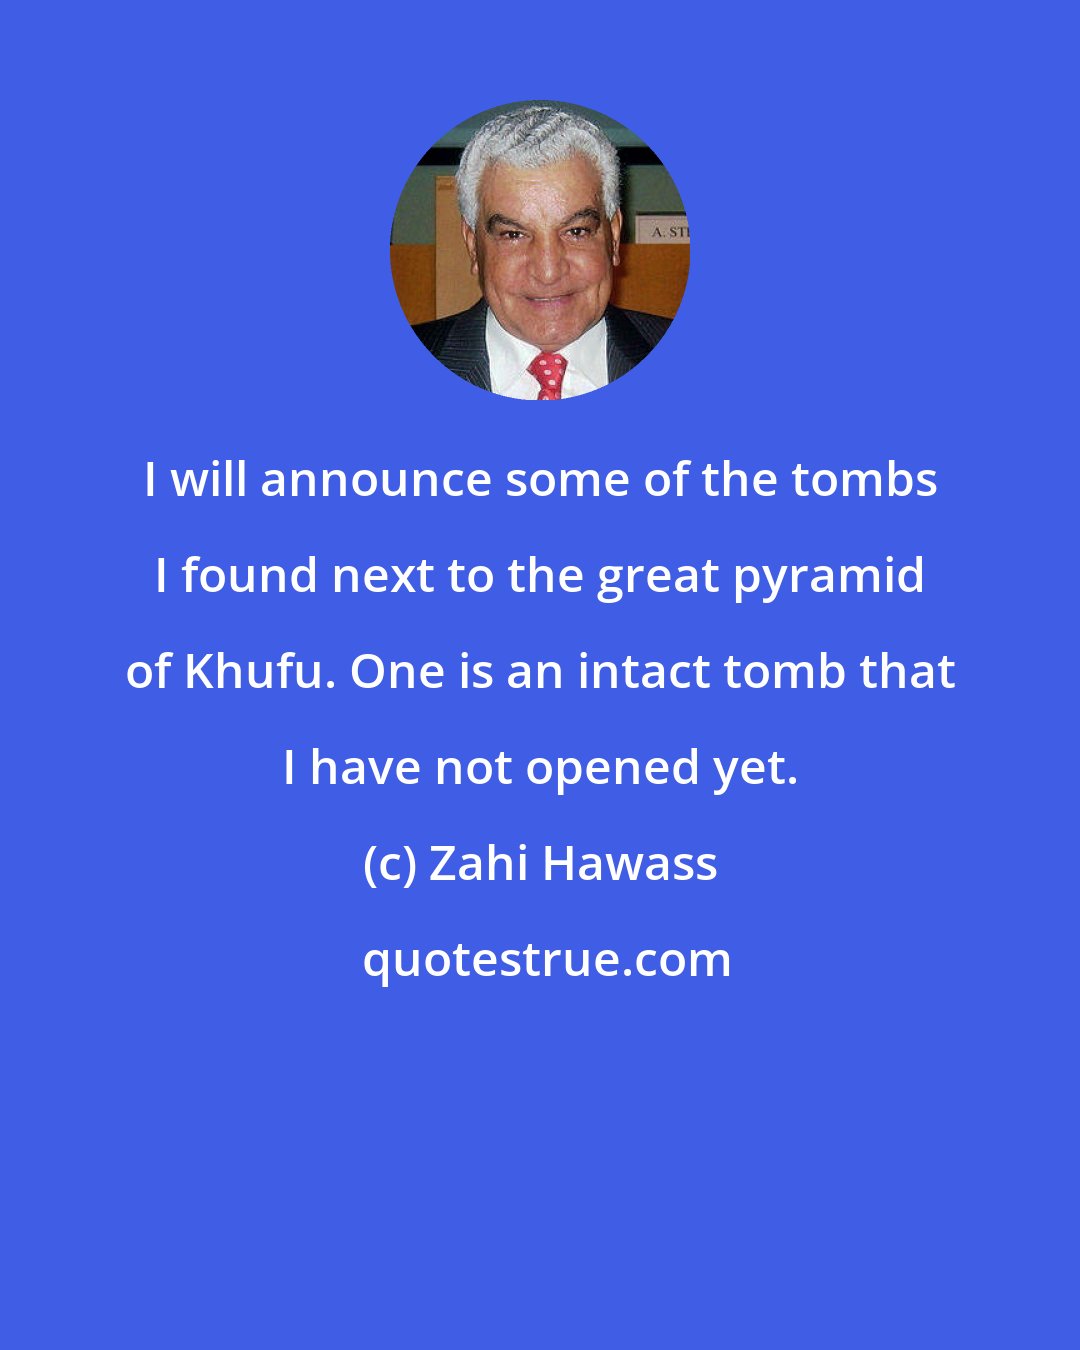 Zahi Hawass: I will announce some of the tombs I found next to the great pyramid of Khufu. One is an intact tomb that I have not opened yet.